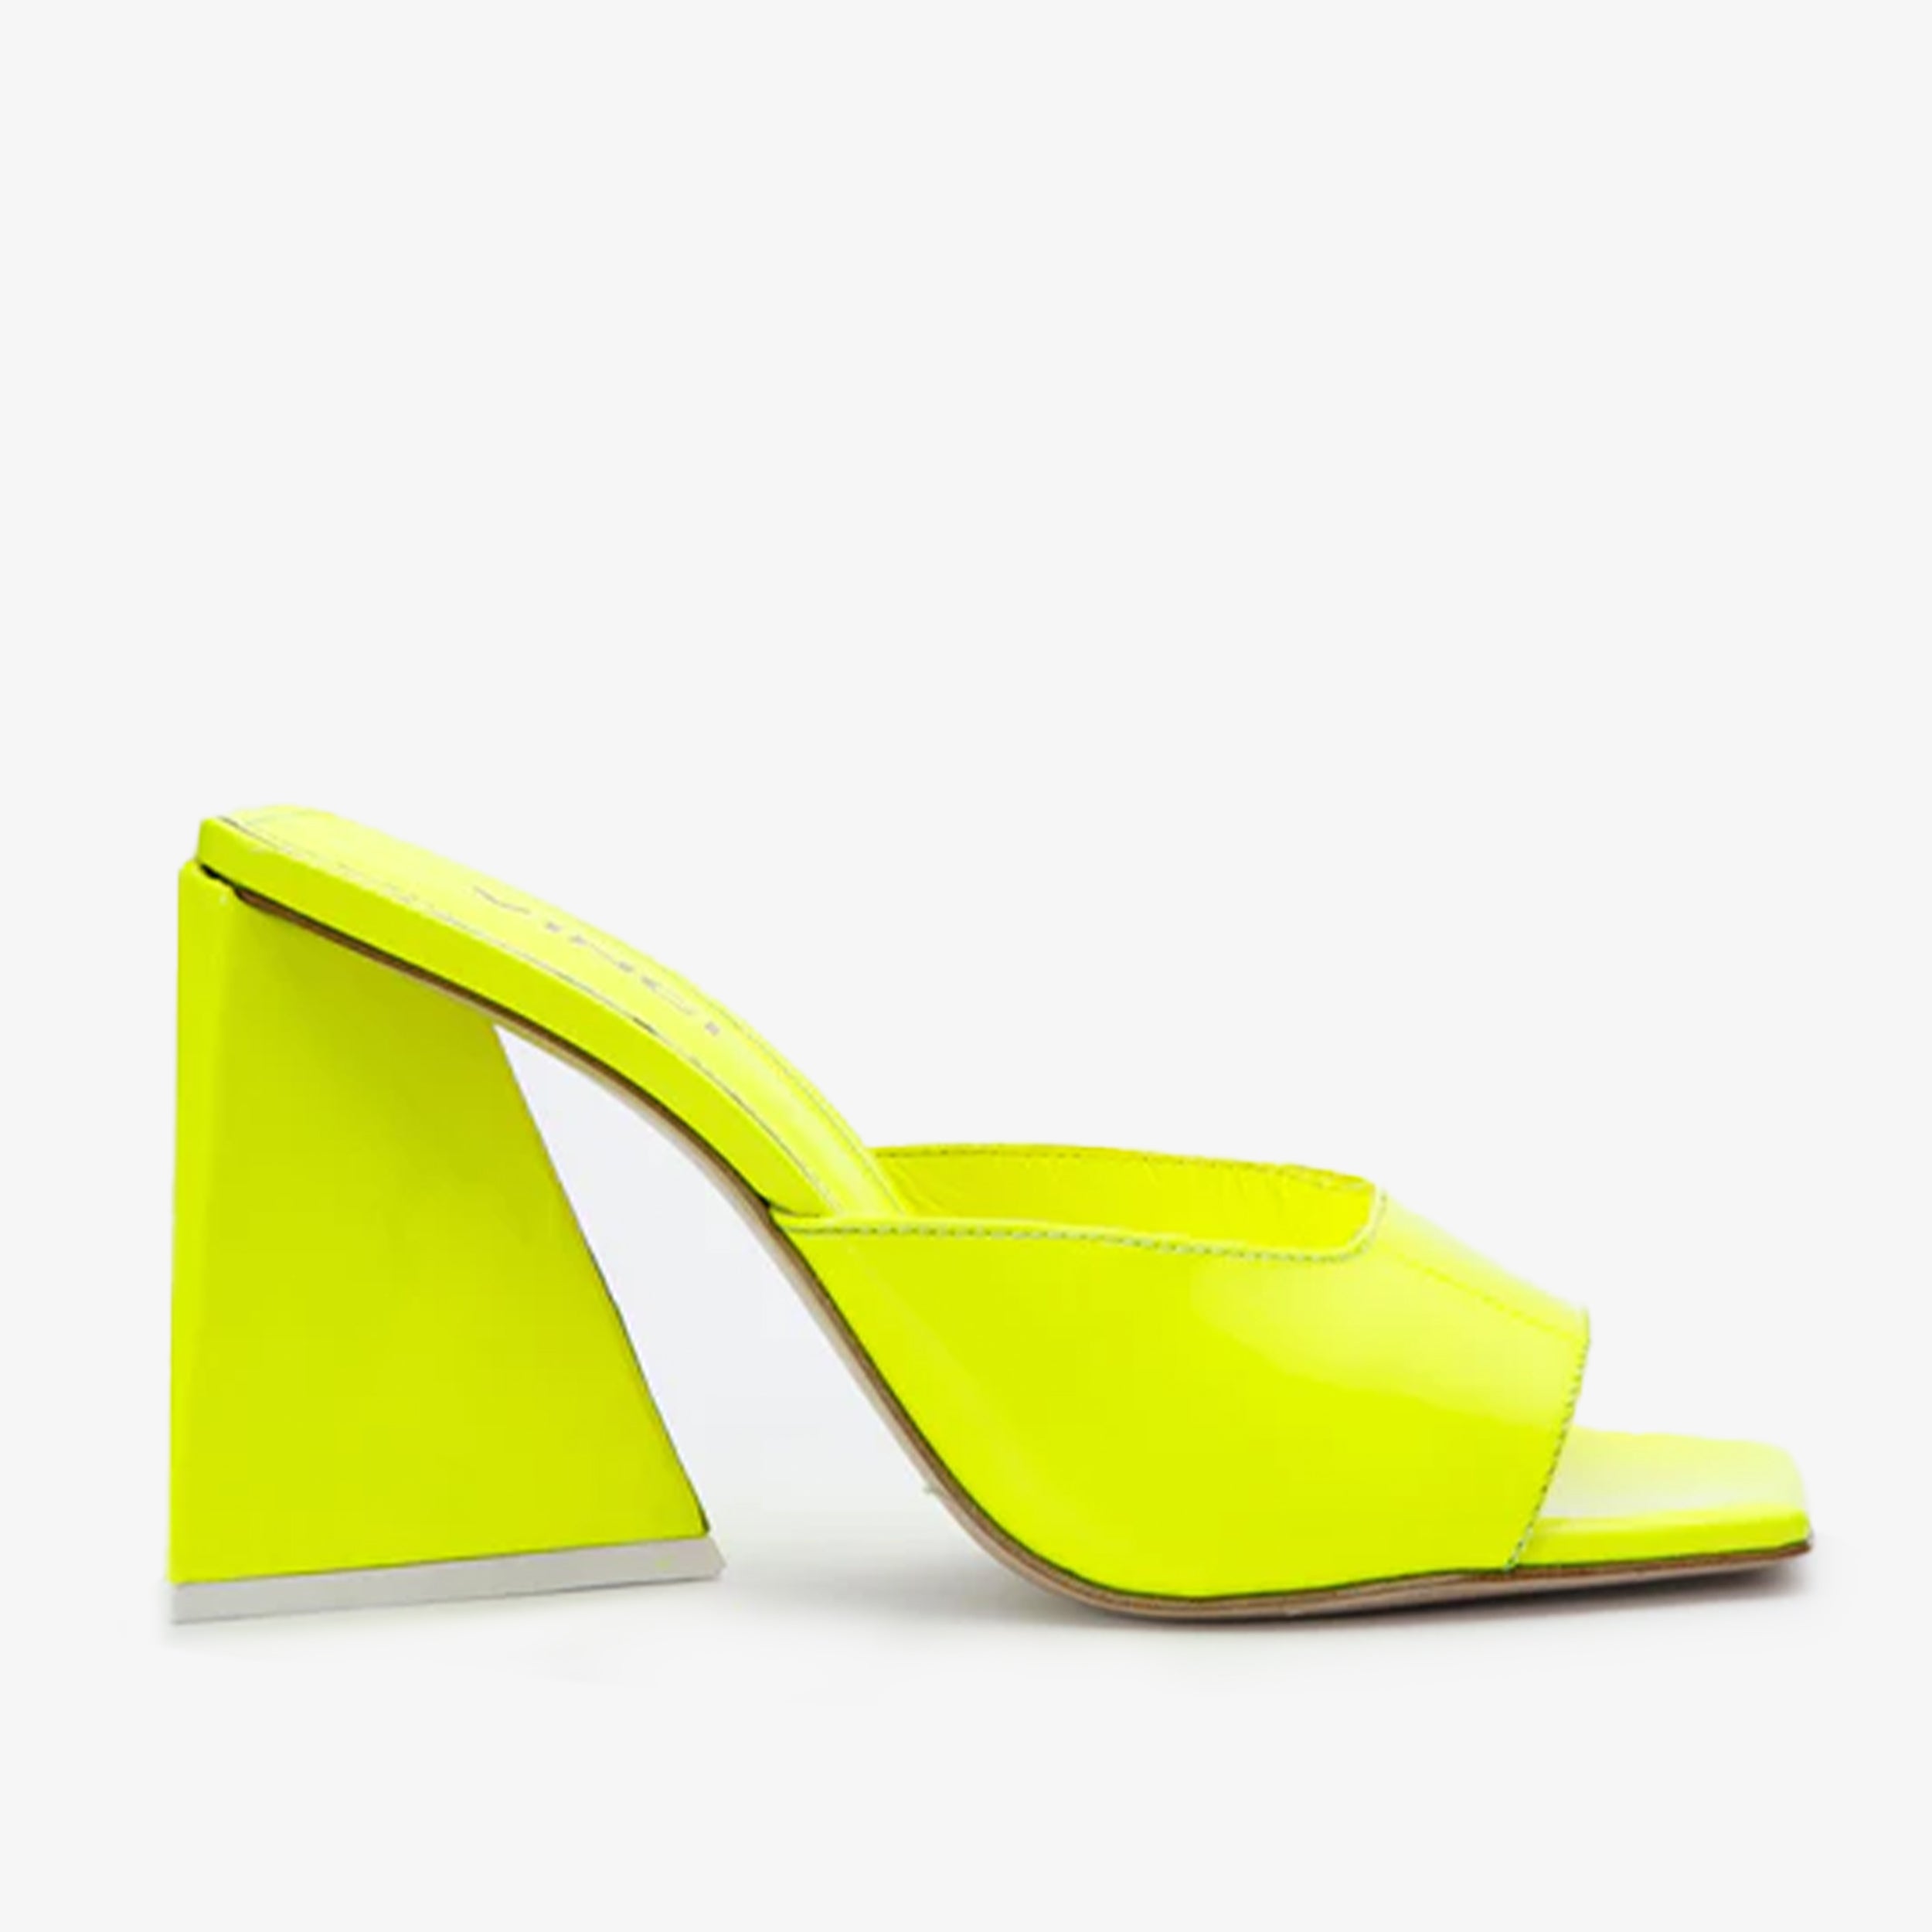 The Butterfly Block Heel Neon Yellow Patent Leather Sandal